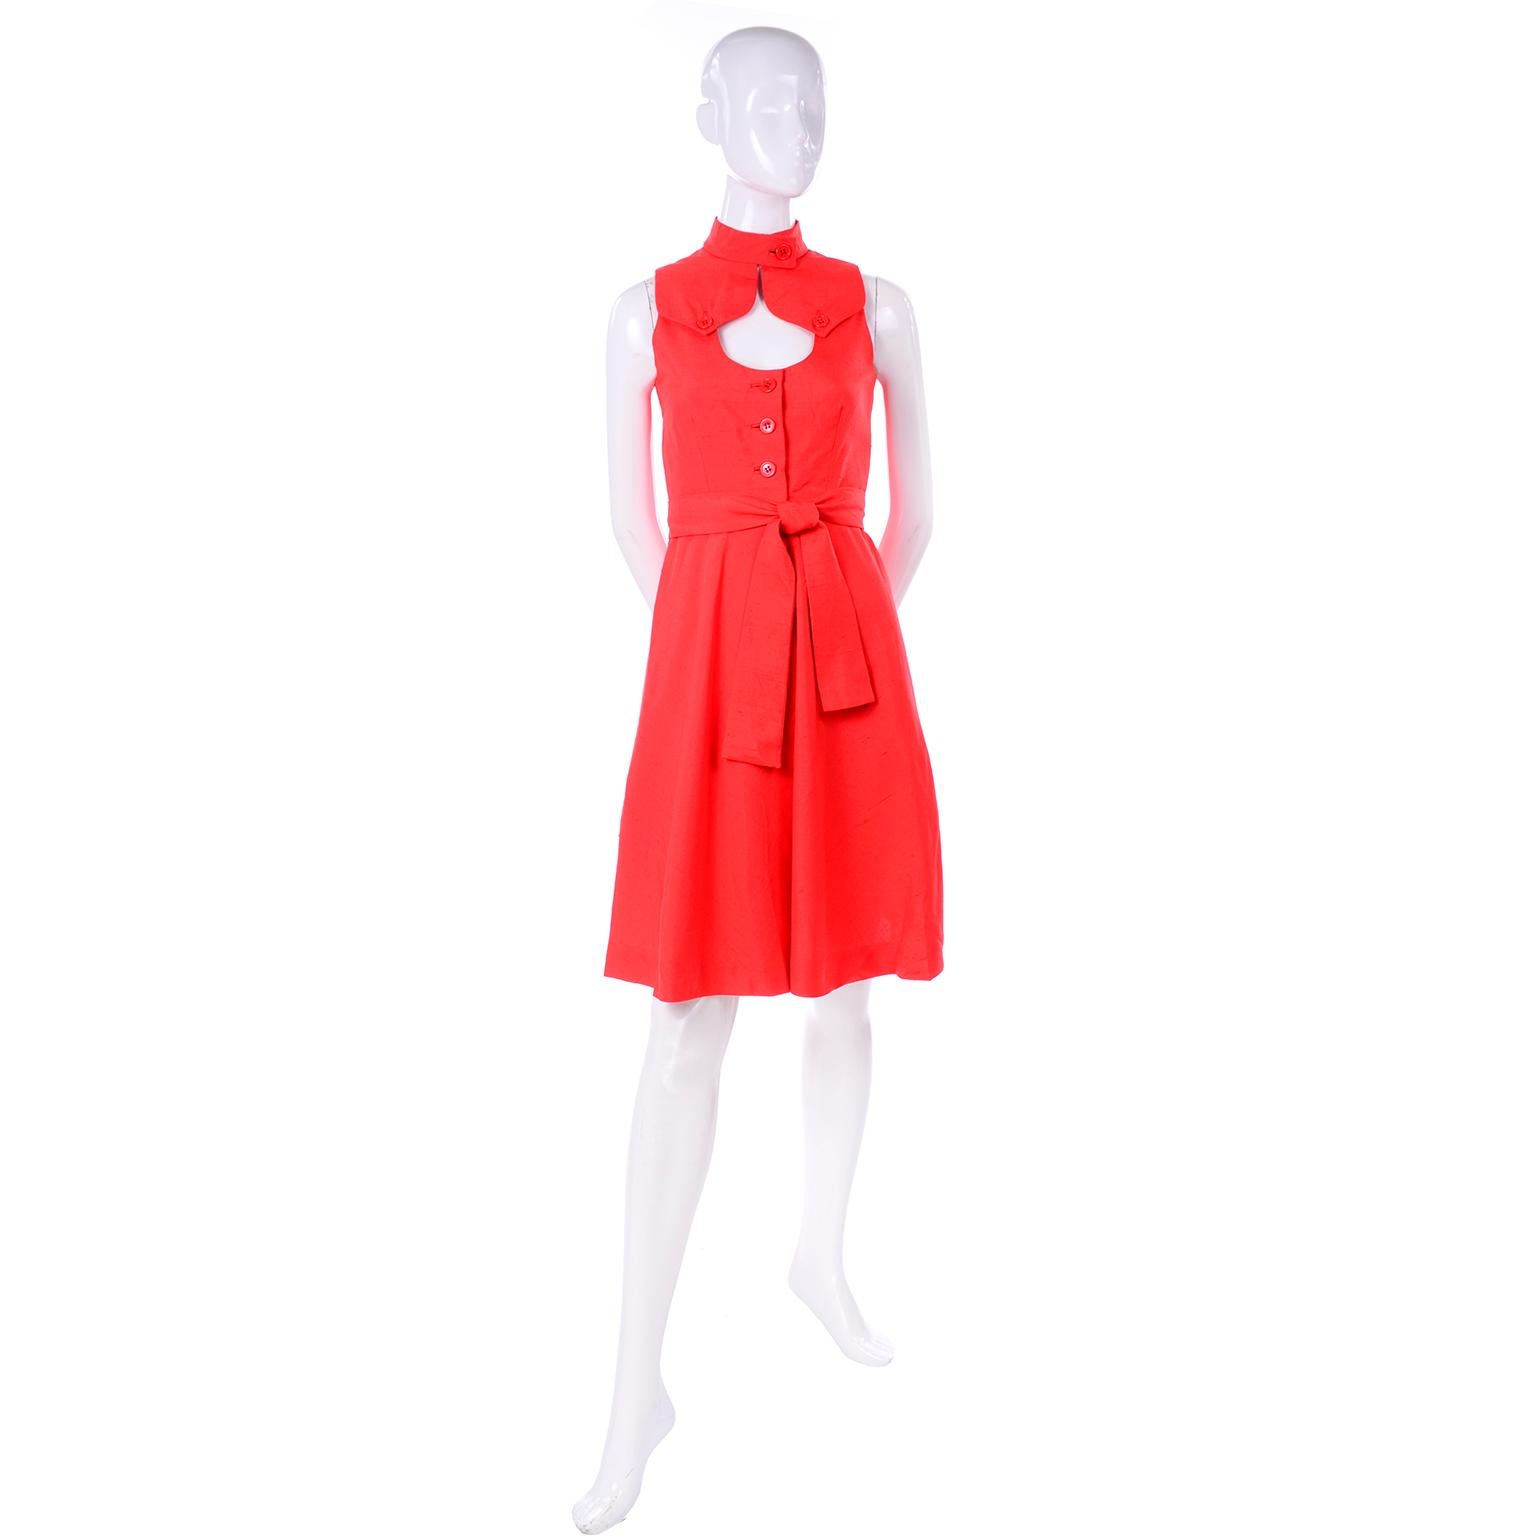 This is a gorgeous dead stock vintage dress by Rodrigues from the 1960's!  This fun, sleeveless dress is in a fiery red/orange raw silk with a button closure at the neck. The dress has a keyhole cutout below the collar and two button flaps from the